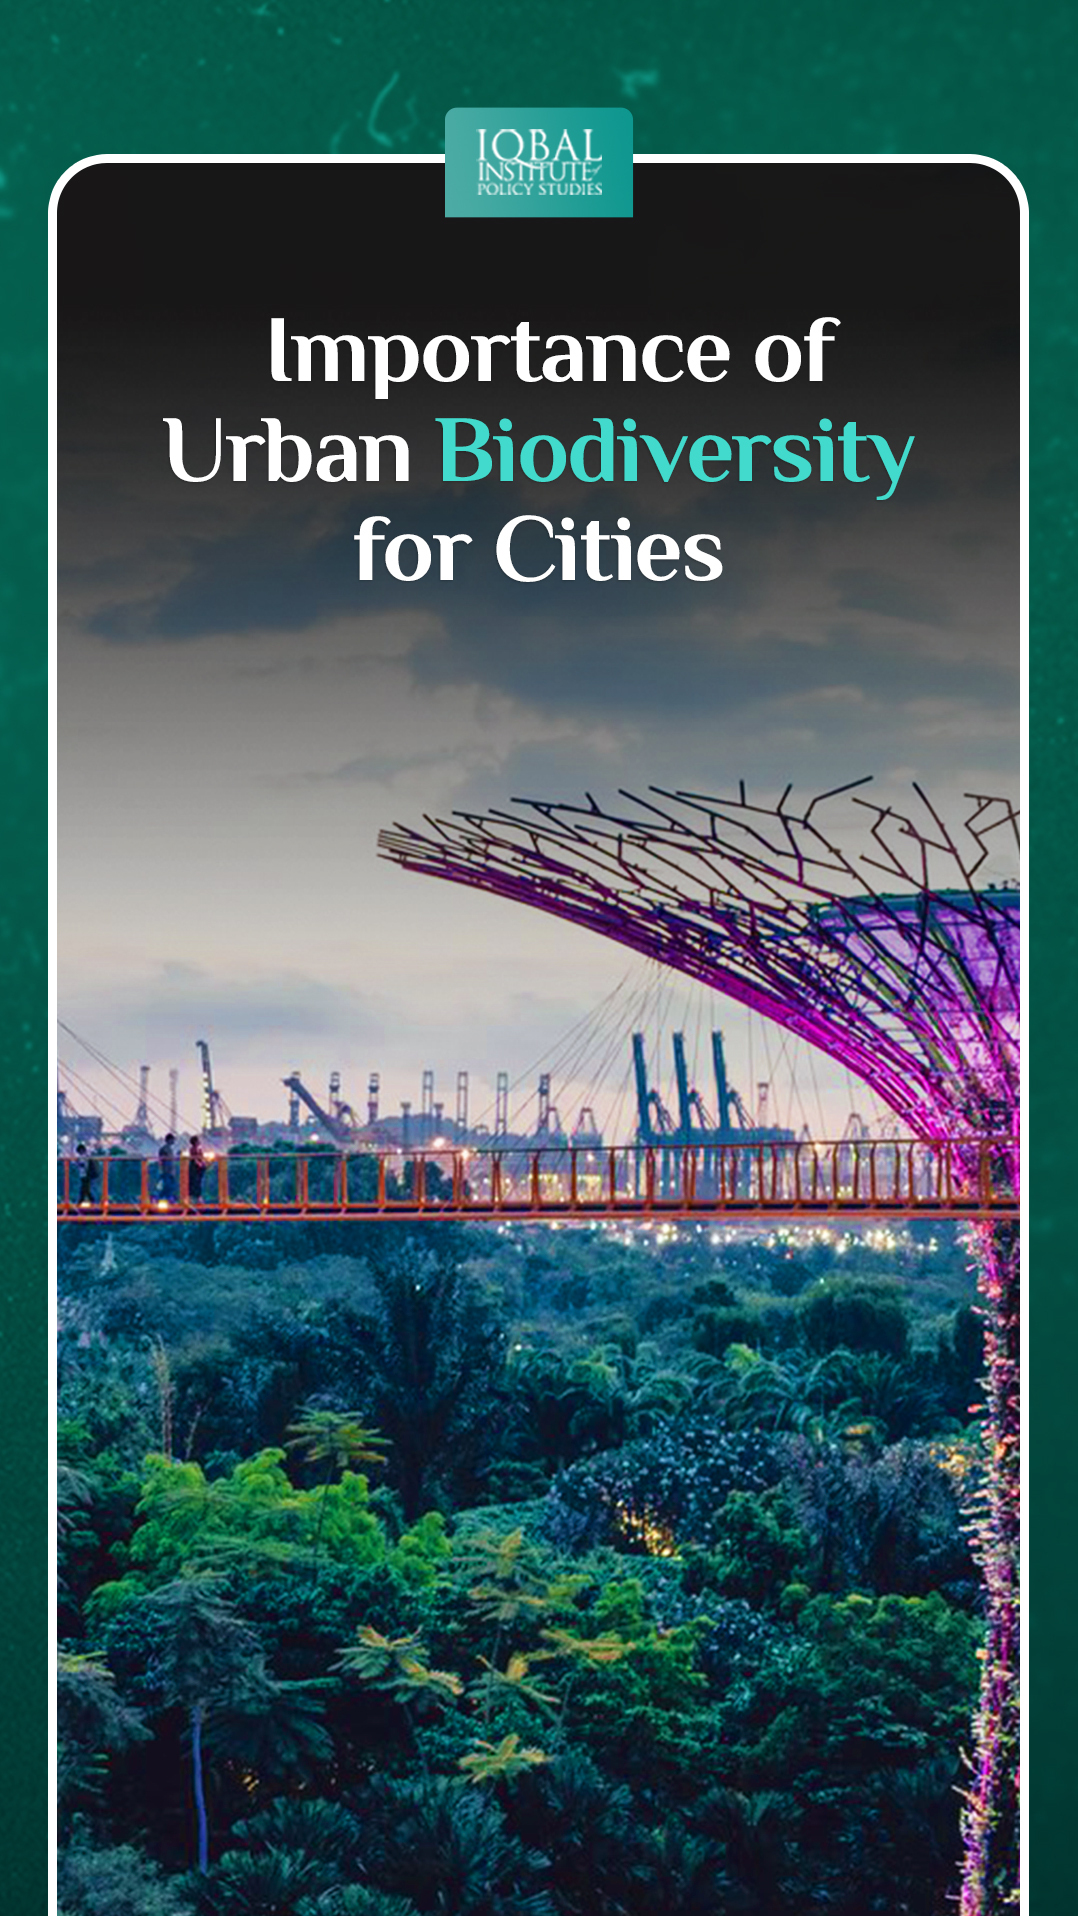 Importance of Urban Biodiversity for cities